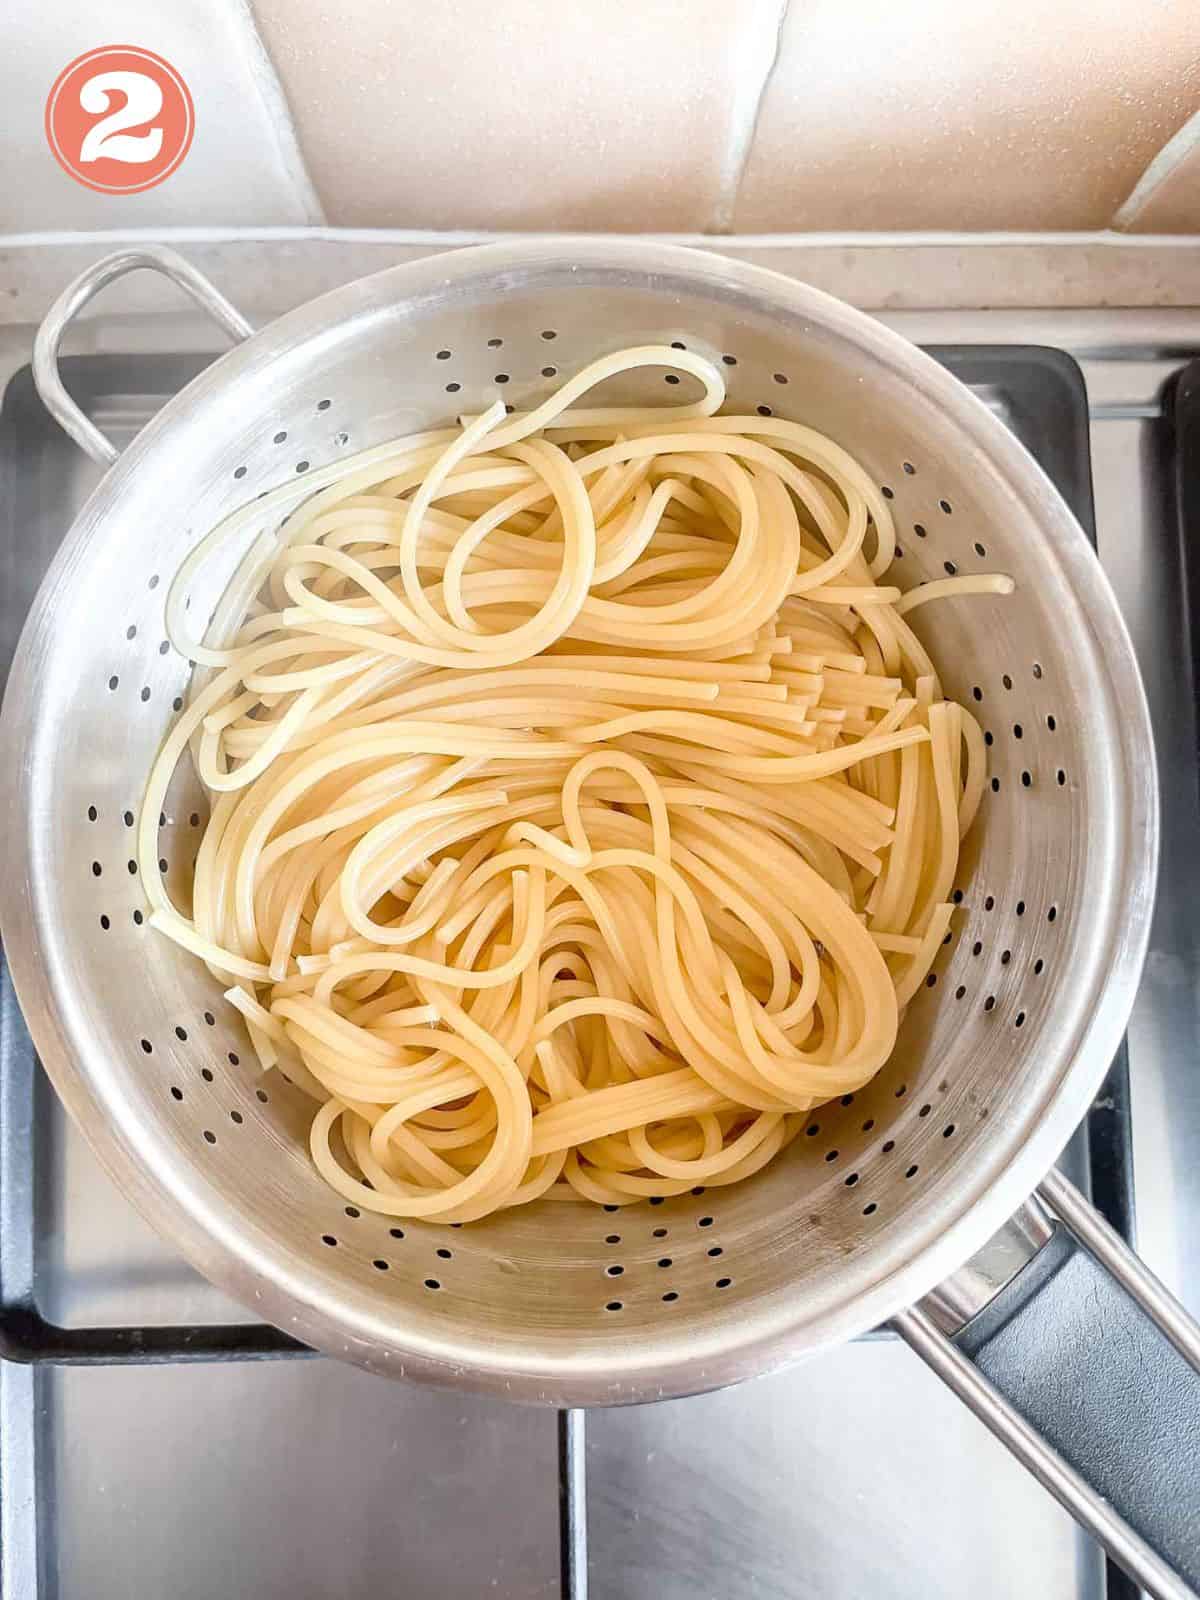 cooked spaghetti pasta in a colander on a stove top labelled number two.